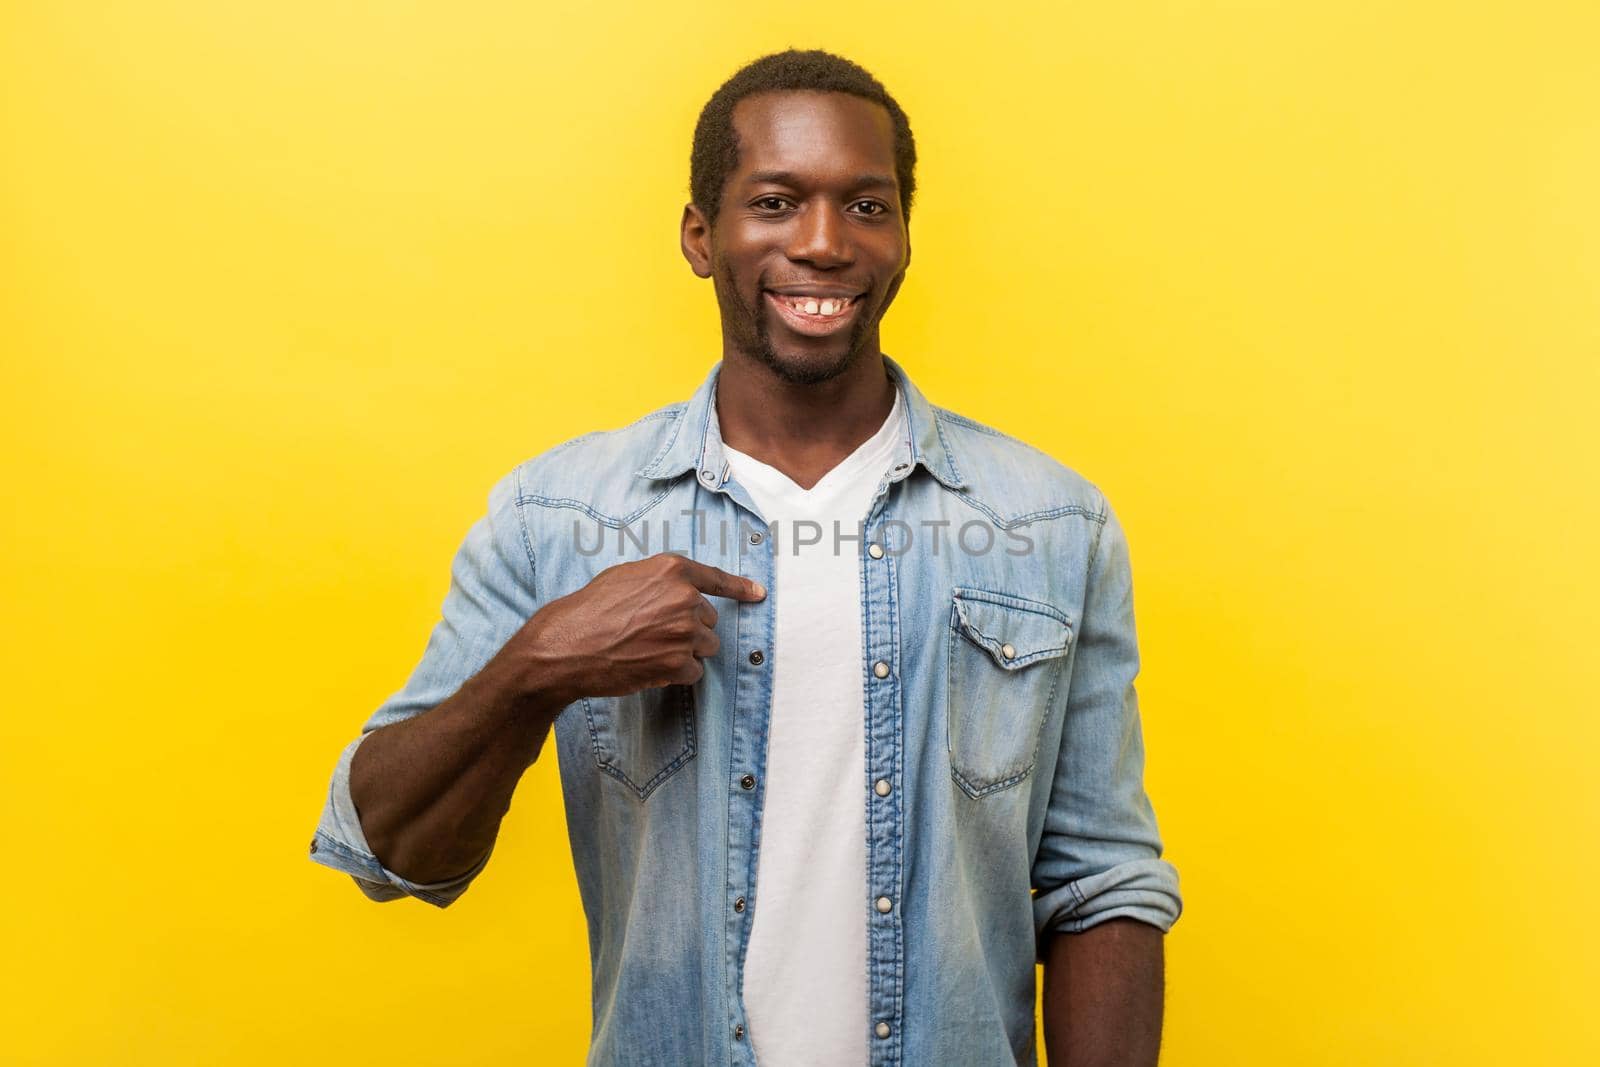 Young emotional man on yellow background. by Khosro1